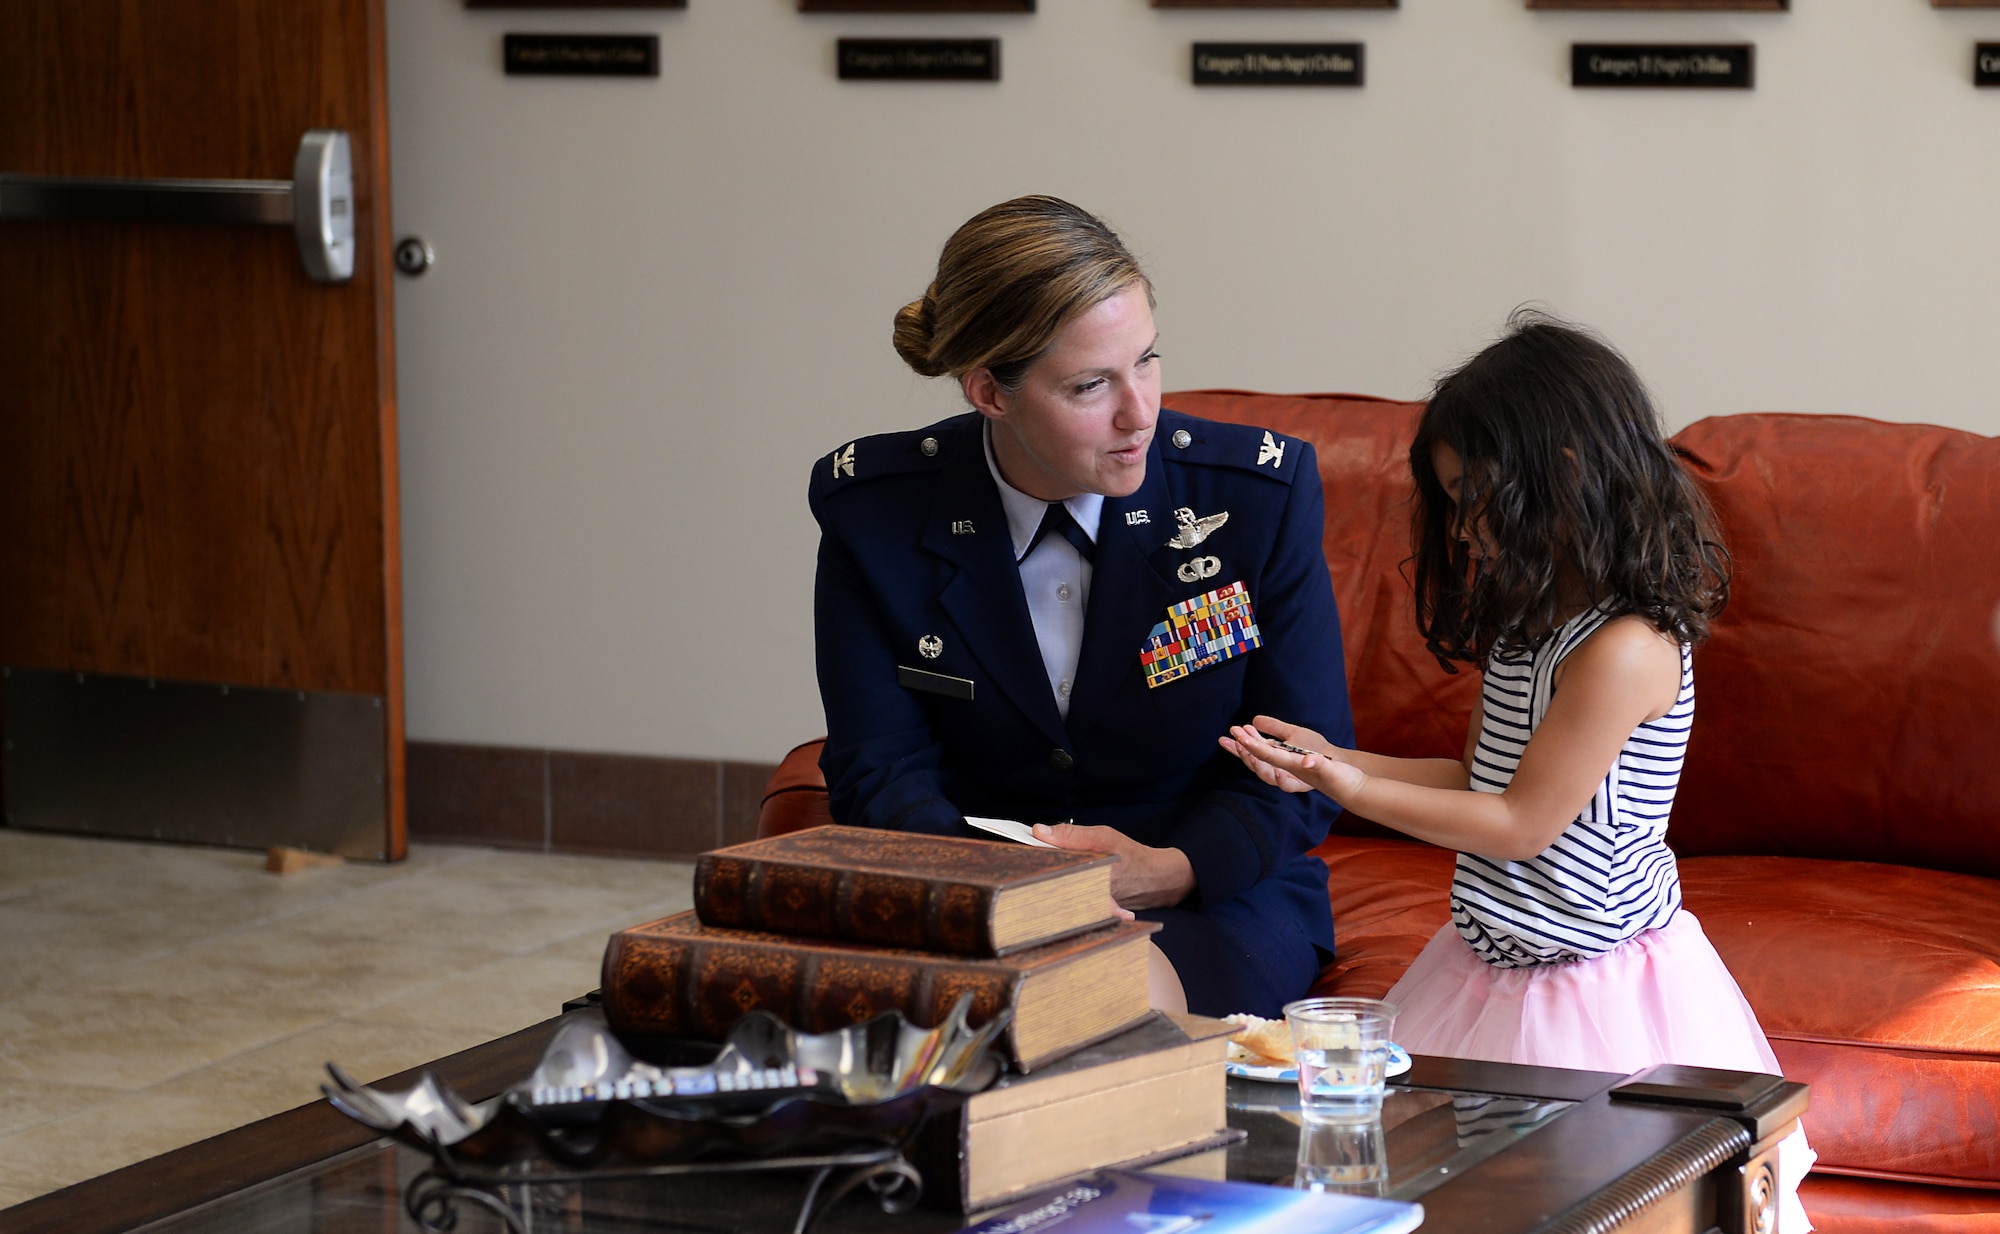 Col. Samantha Weeks, 14 Flying Training Wing commander, gives Aeliana, daughter of 1st Lt. David Albandoz, 198th Airlift Squadron C-130H pilot, Puerto Rico a coin after a Memorial Day Ceremony May 28, 2019, on Columbus Air Force Base, Miss. Aeliana visited Columbus AFB with her mother, Nicoleta Padureanu, to attend a Memorial Day Ceremony in honor of her late father where his name was unveiled on the memorial wall in the Richard “Gene” Smith Plaza. (U.S. Air Force photo by Airman 1st Class Hannah Bean)